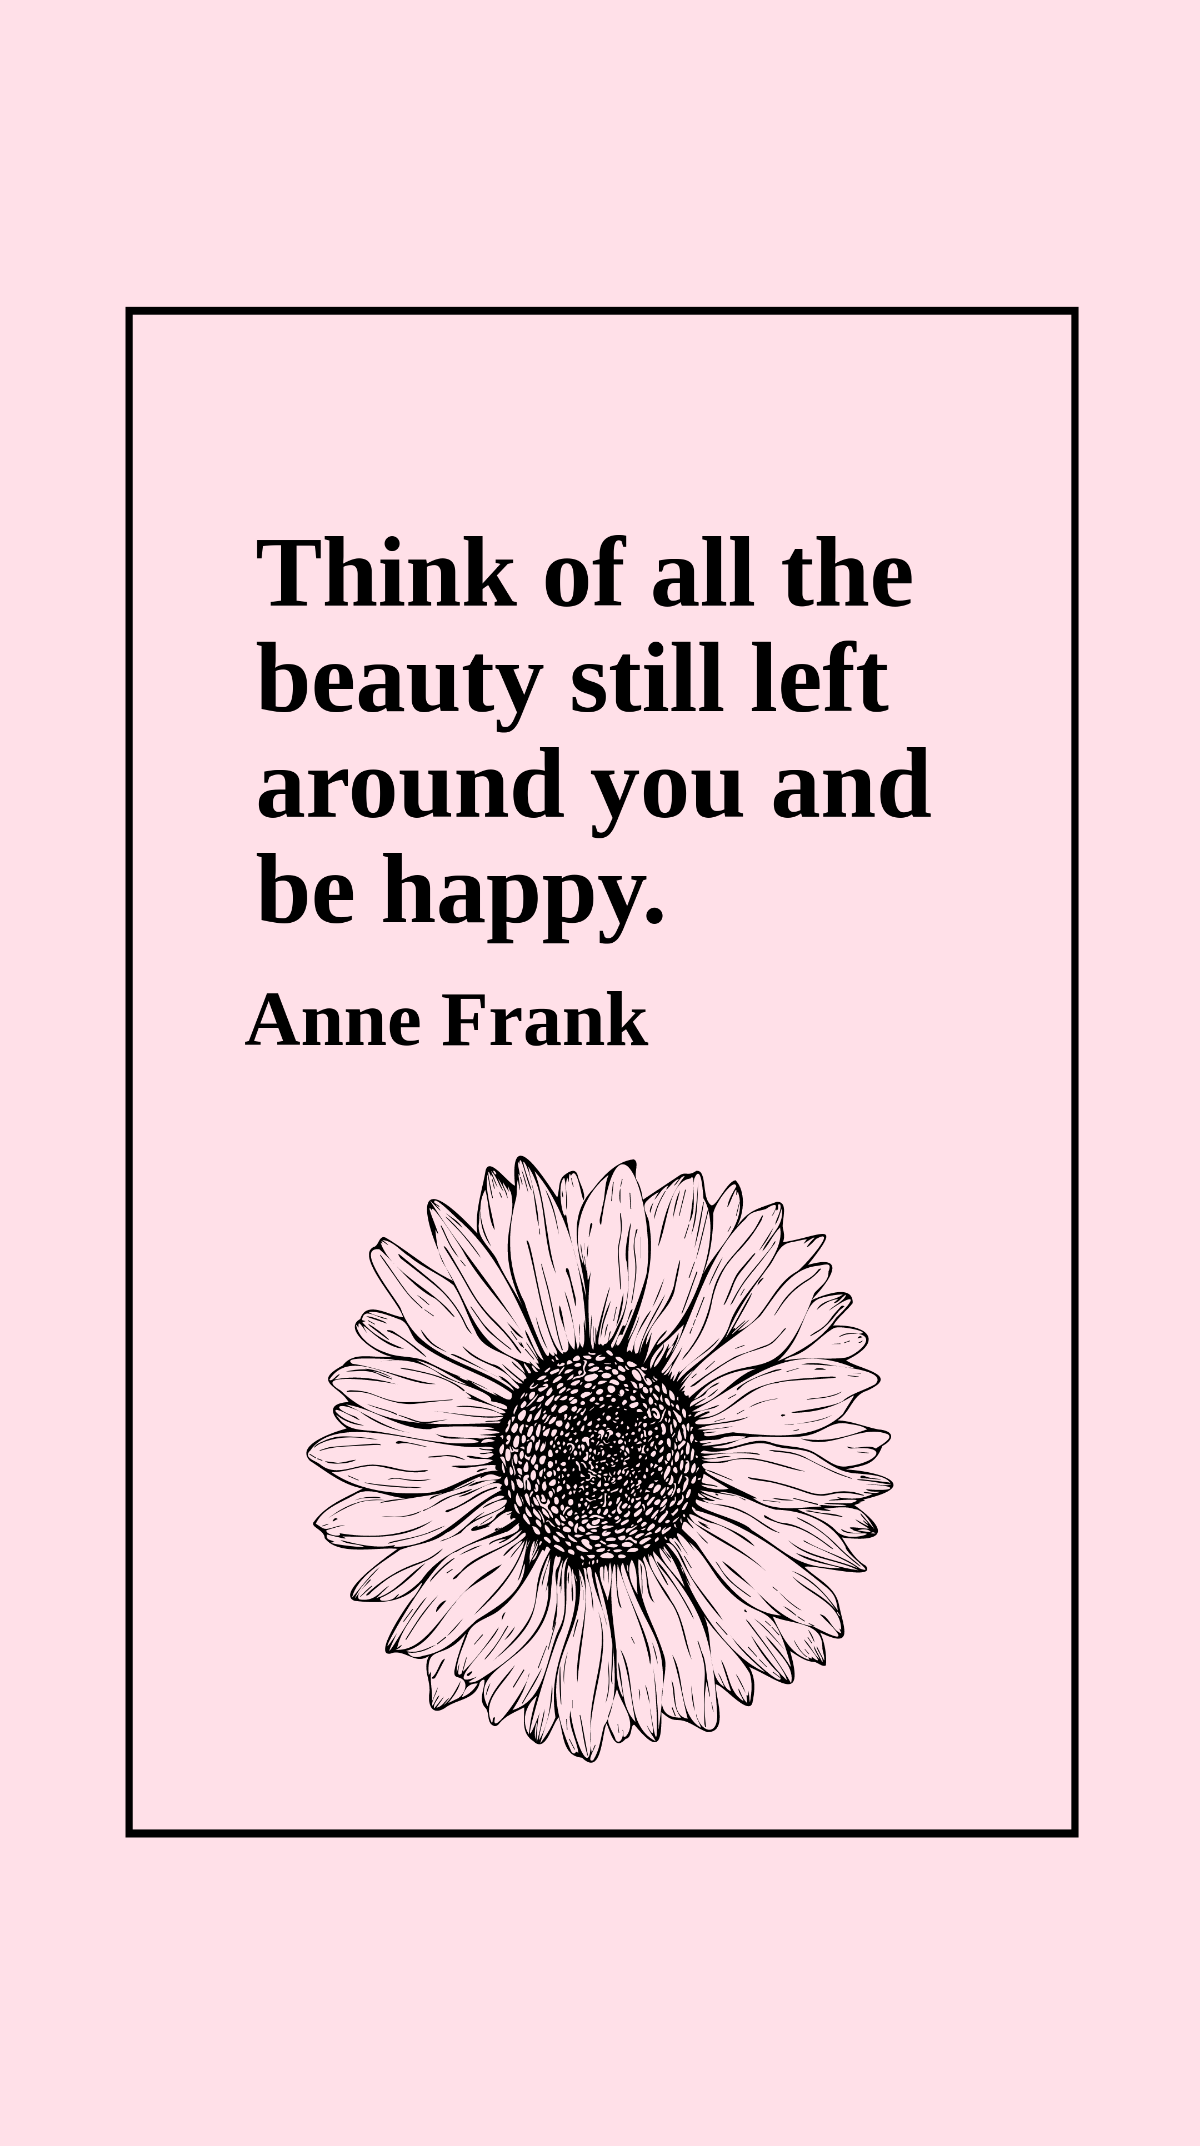 Anne Frank - Think of all the beauty still left around you and be happy. Template